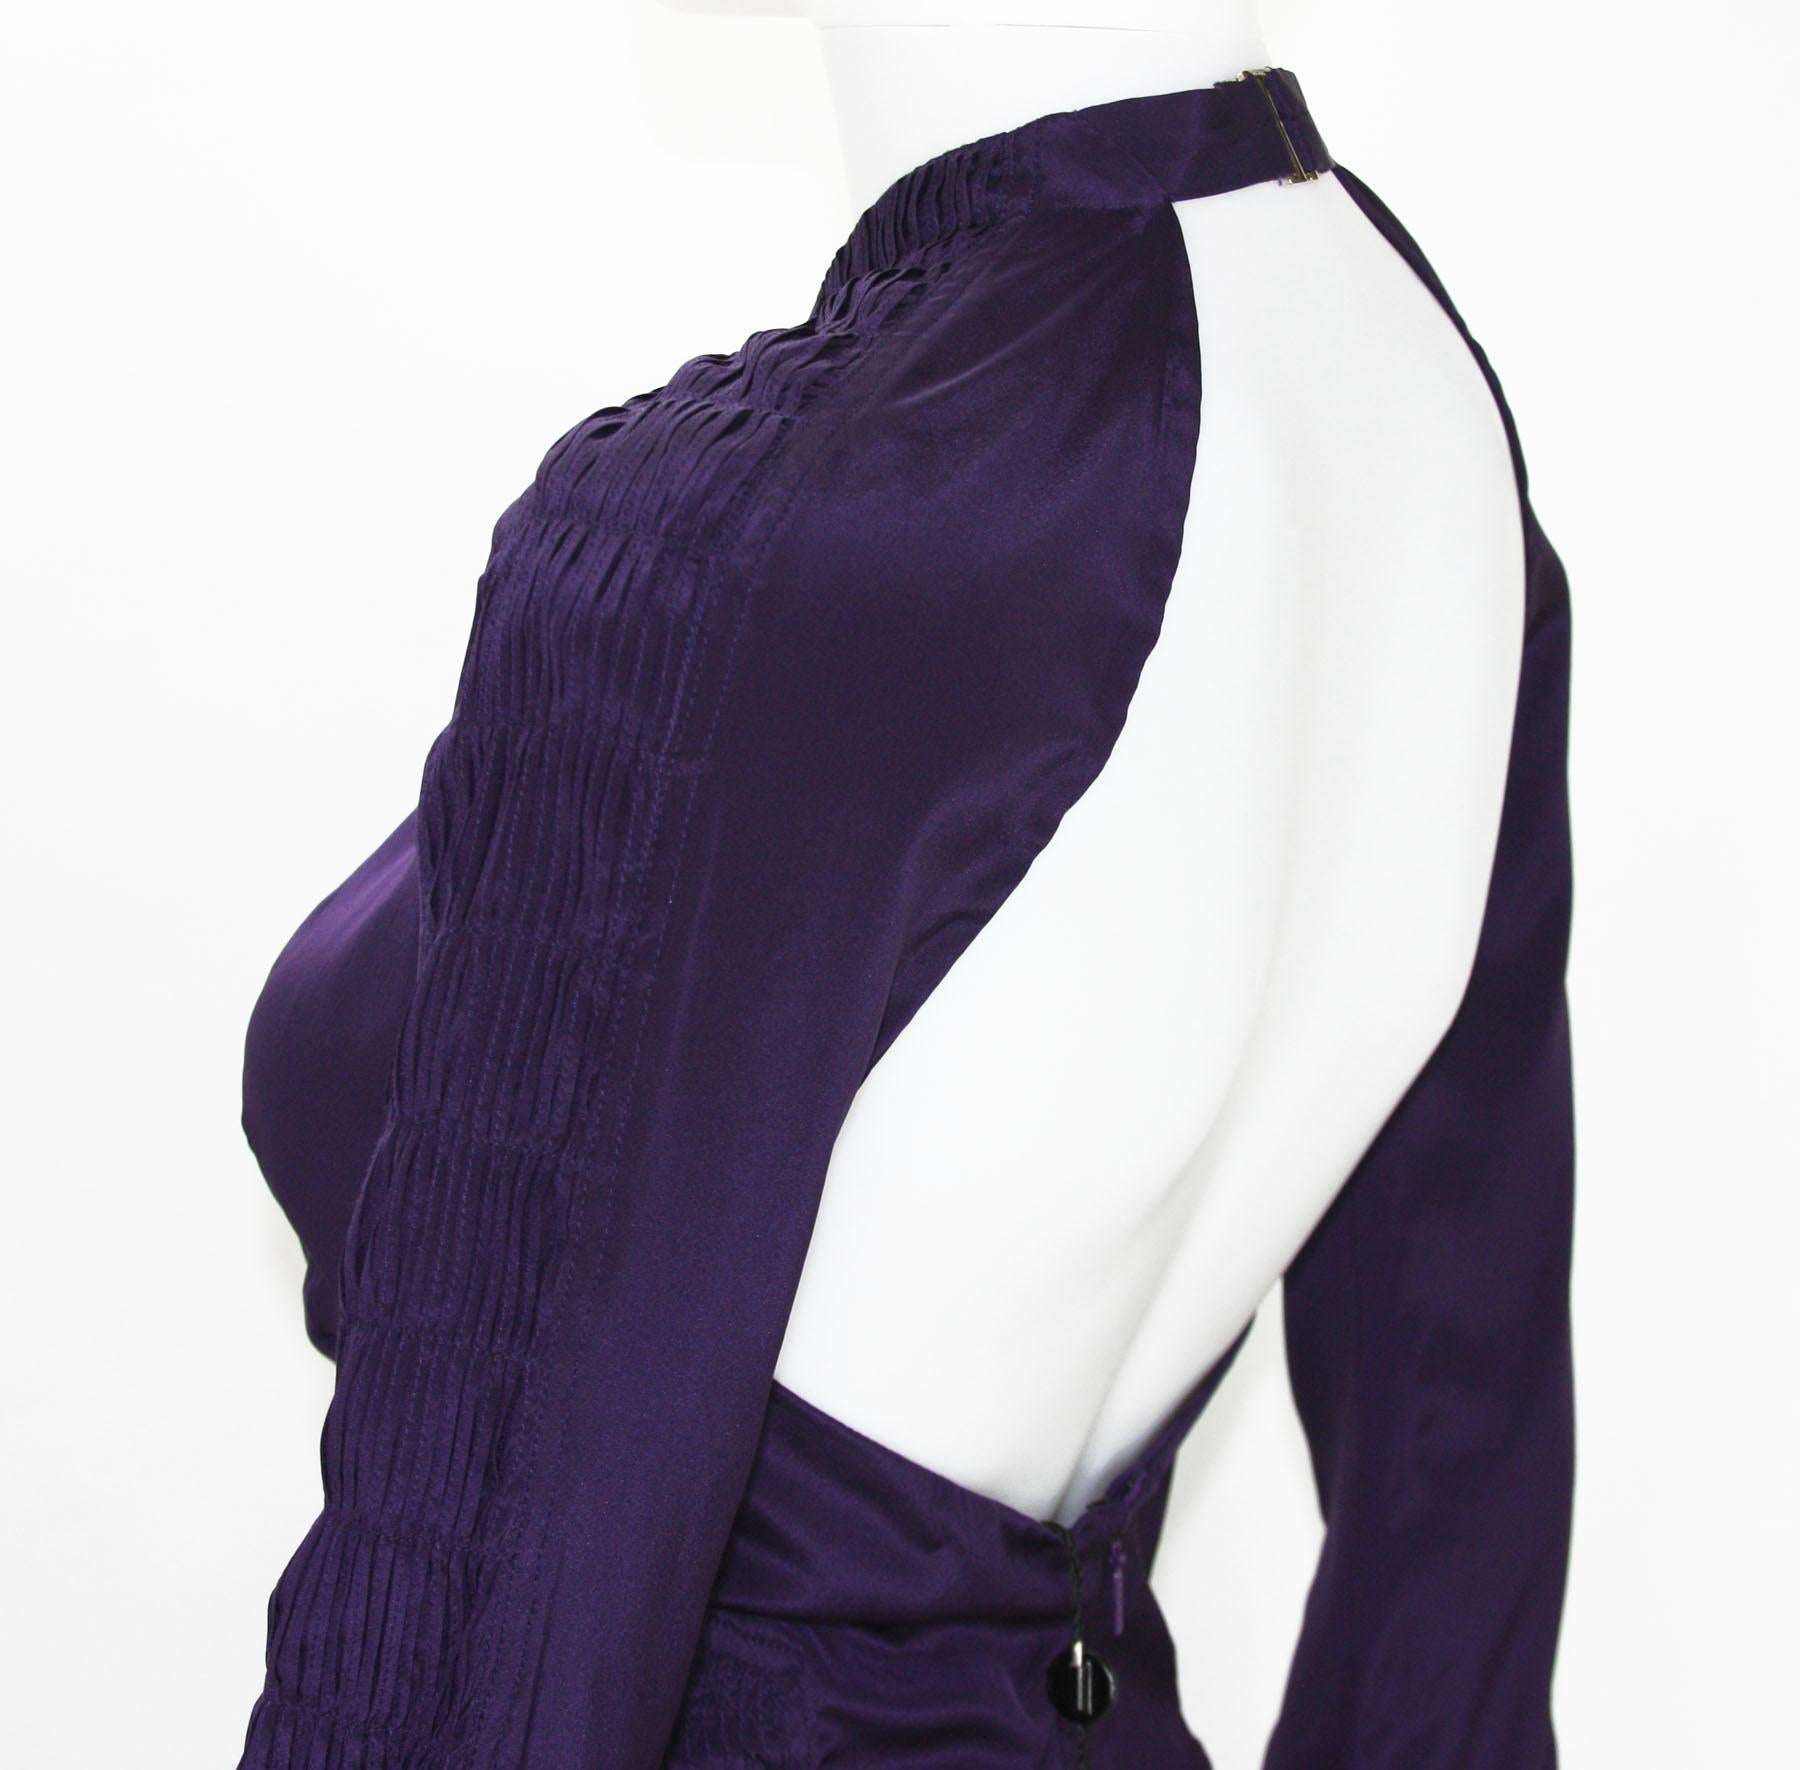 New Tom Ford for Gucci S/S 2004 Deep Purple Silk Plunging Backless Dress 38 & 44 For Sale 1